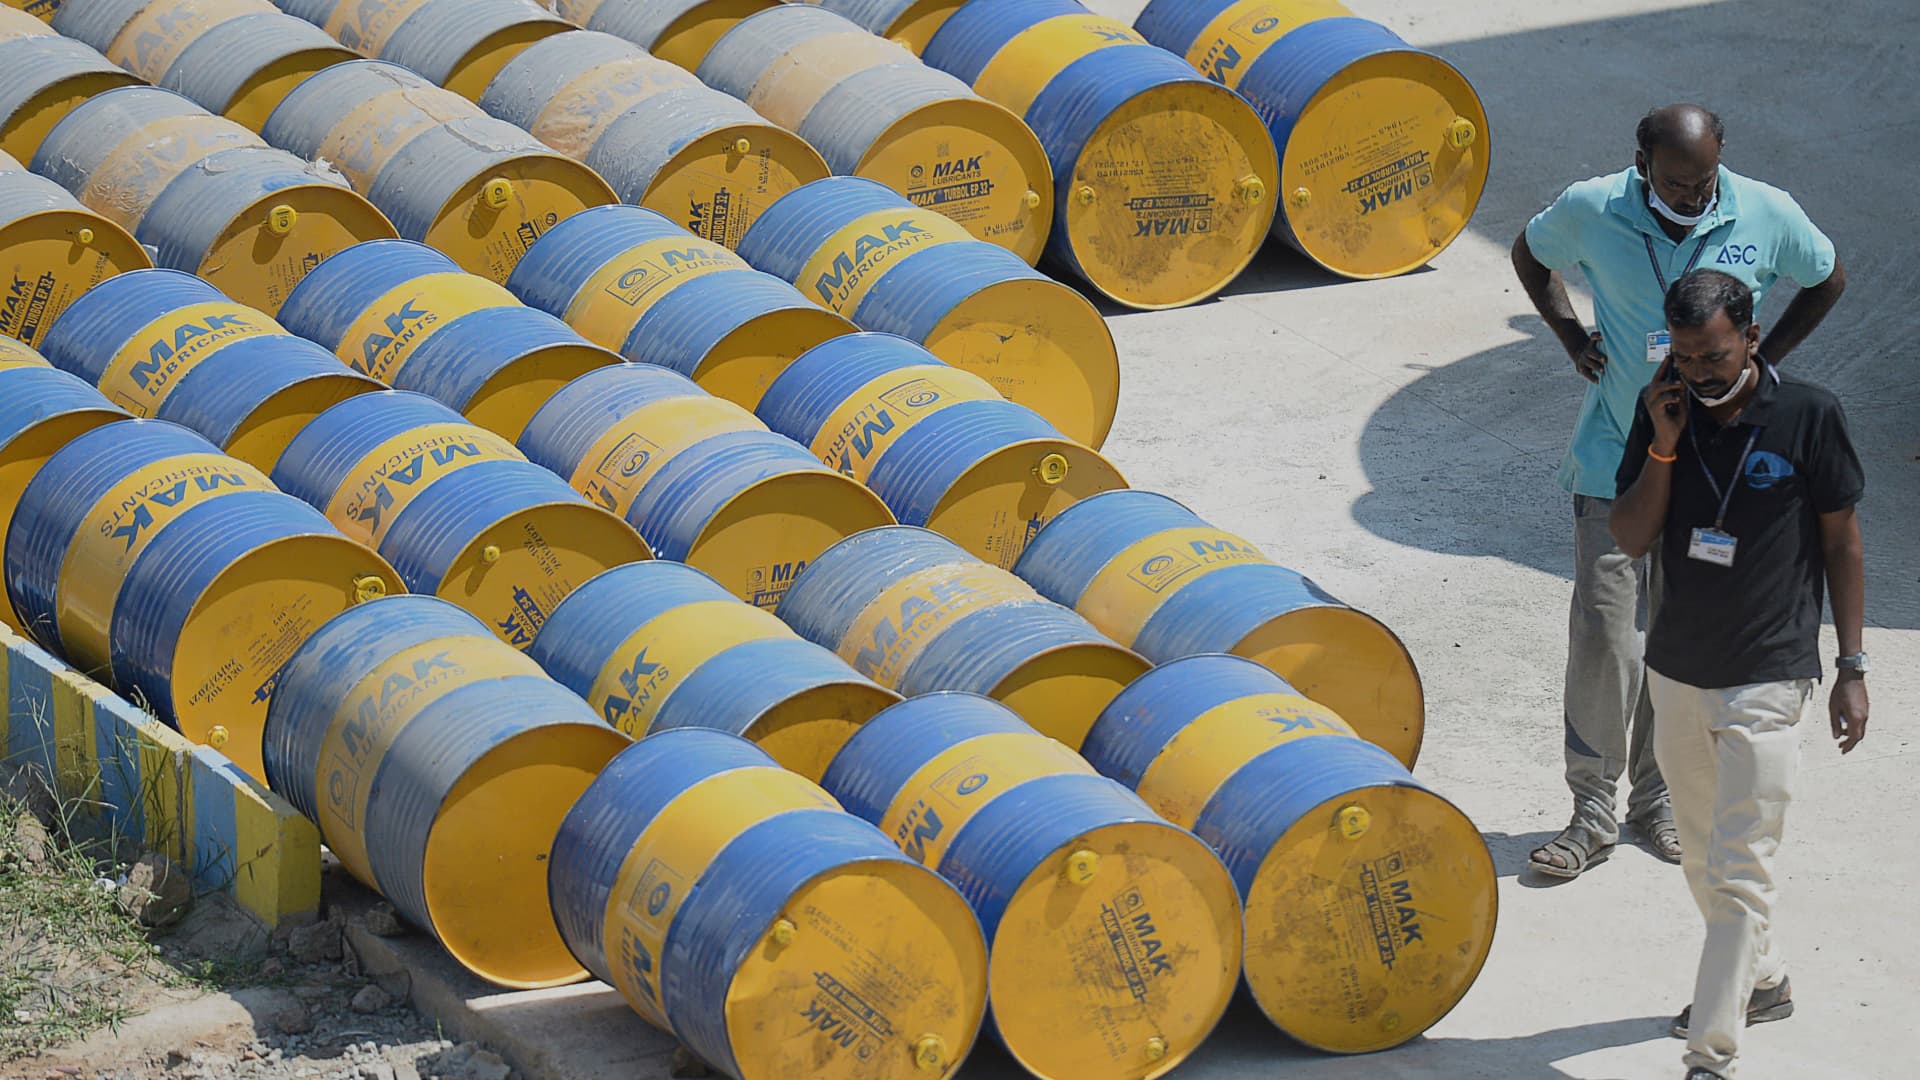 Workers walk past oil barrels at a filling station in n Chennai on February 24, 2022.